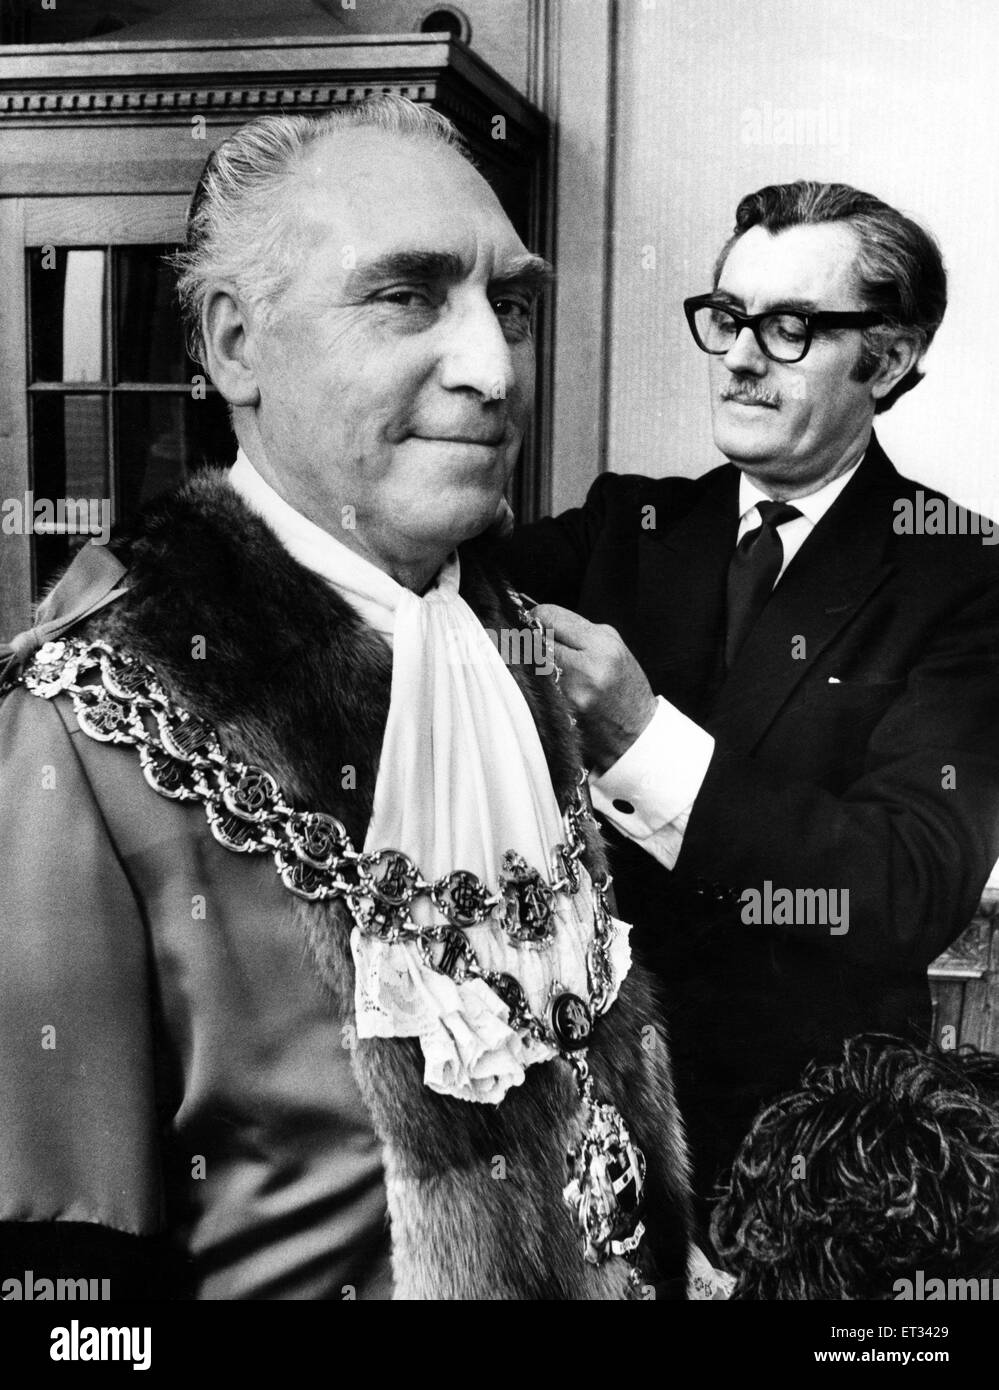 Councillor James Eames being robed by his attendant Mr. Tom Freer before being elected Lord Mayor of Birmingham. Eames is a 57-year-old engine driver. 21st May 1974. Stock Photo